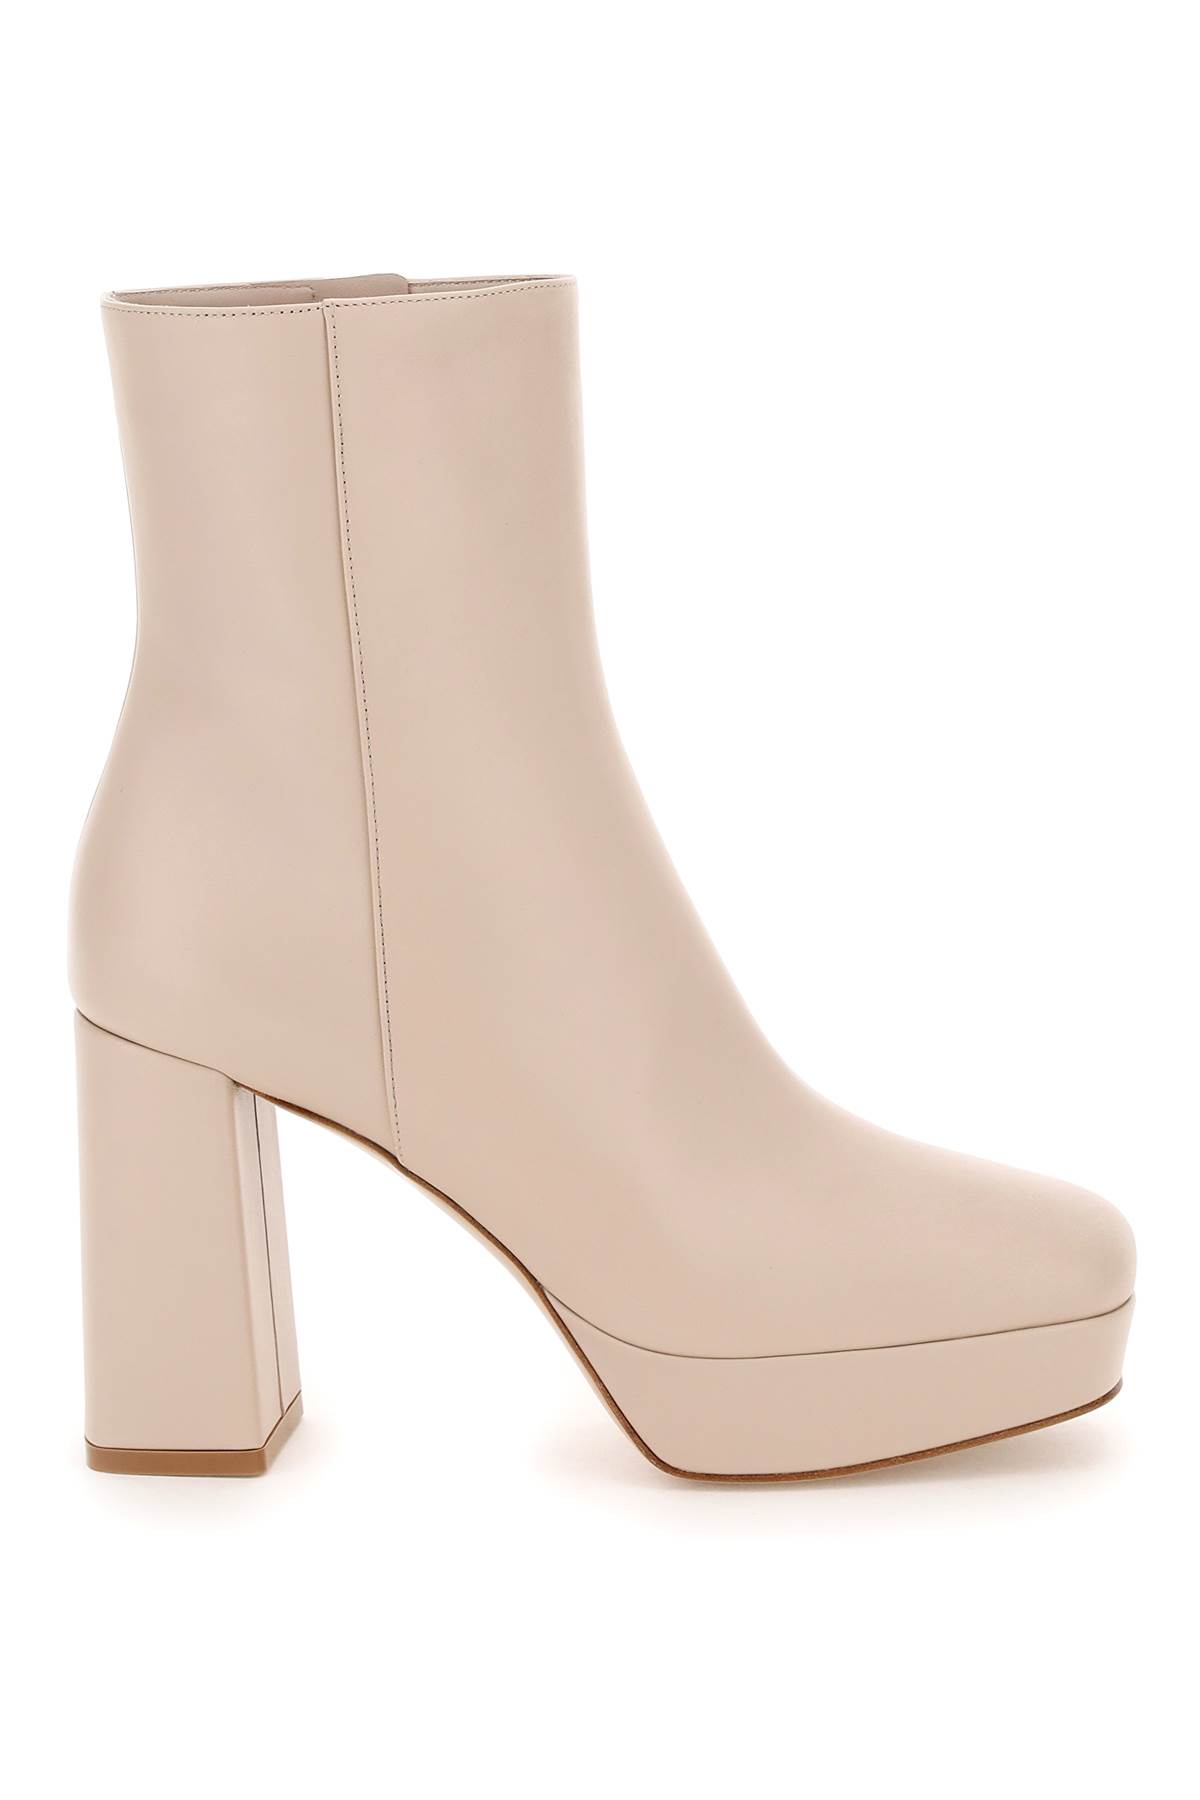 Gianvito Rossi Daisen Leather Ankle Boots